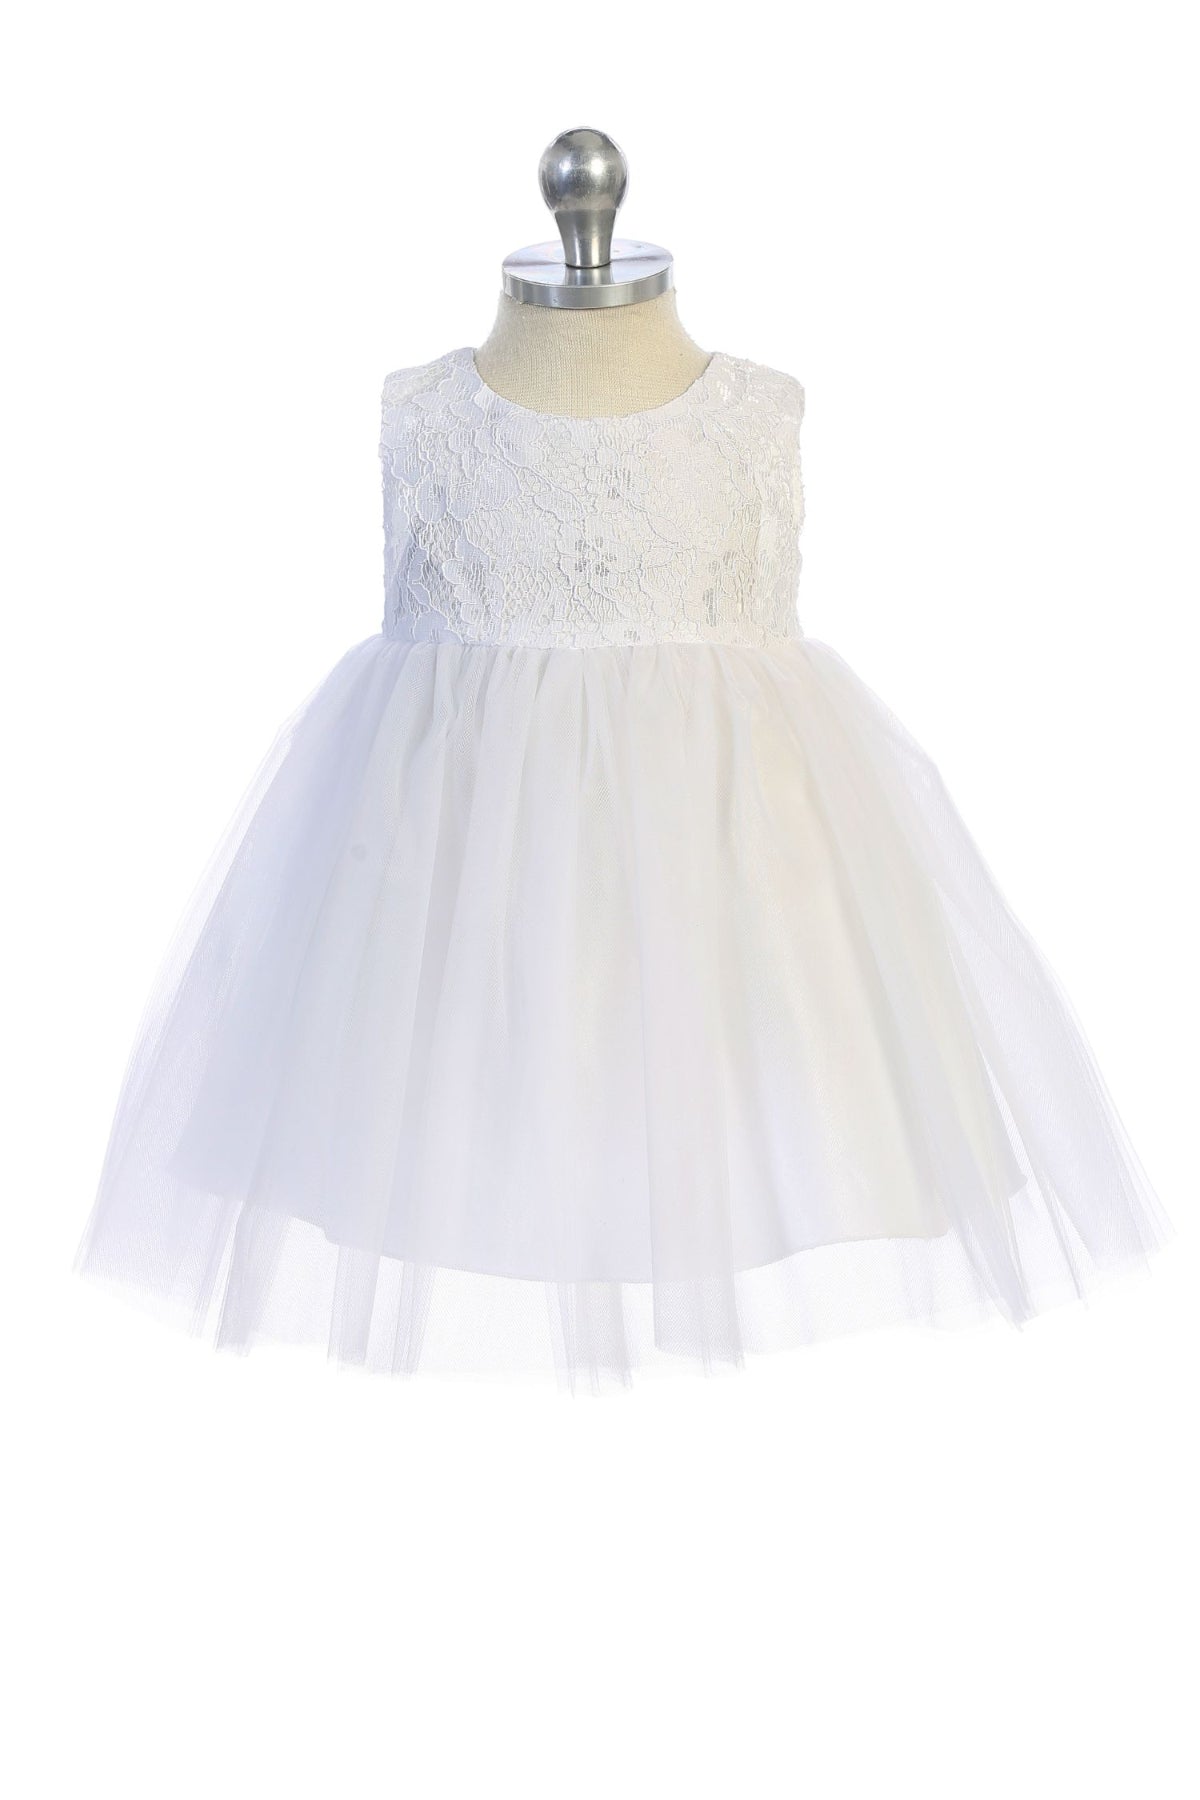 456B-B Lace Illusion Baby Dress with Mesh Pearl Trim